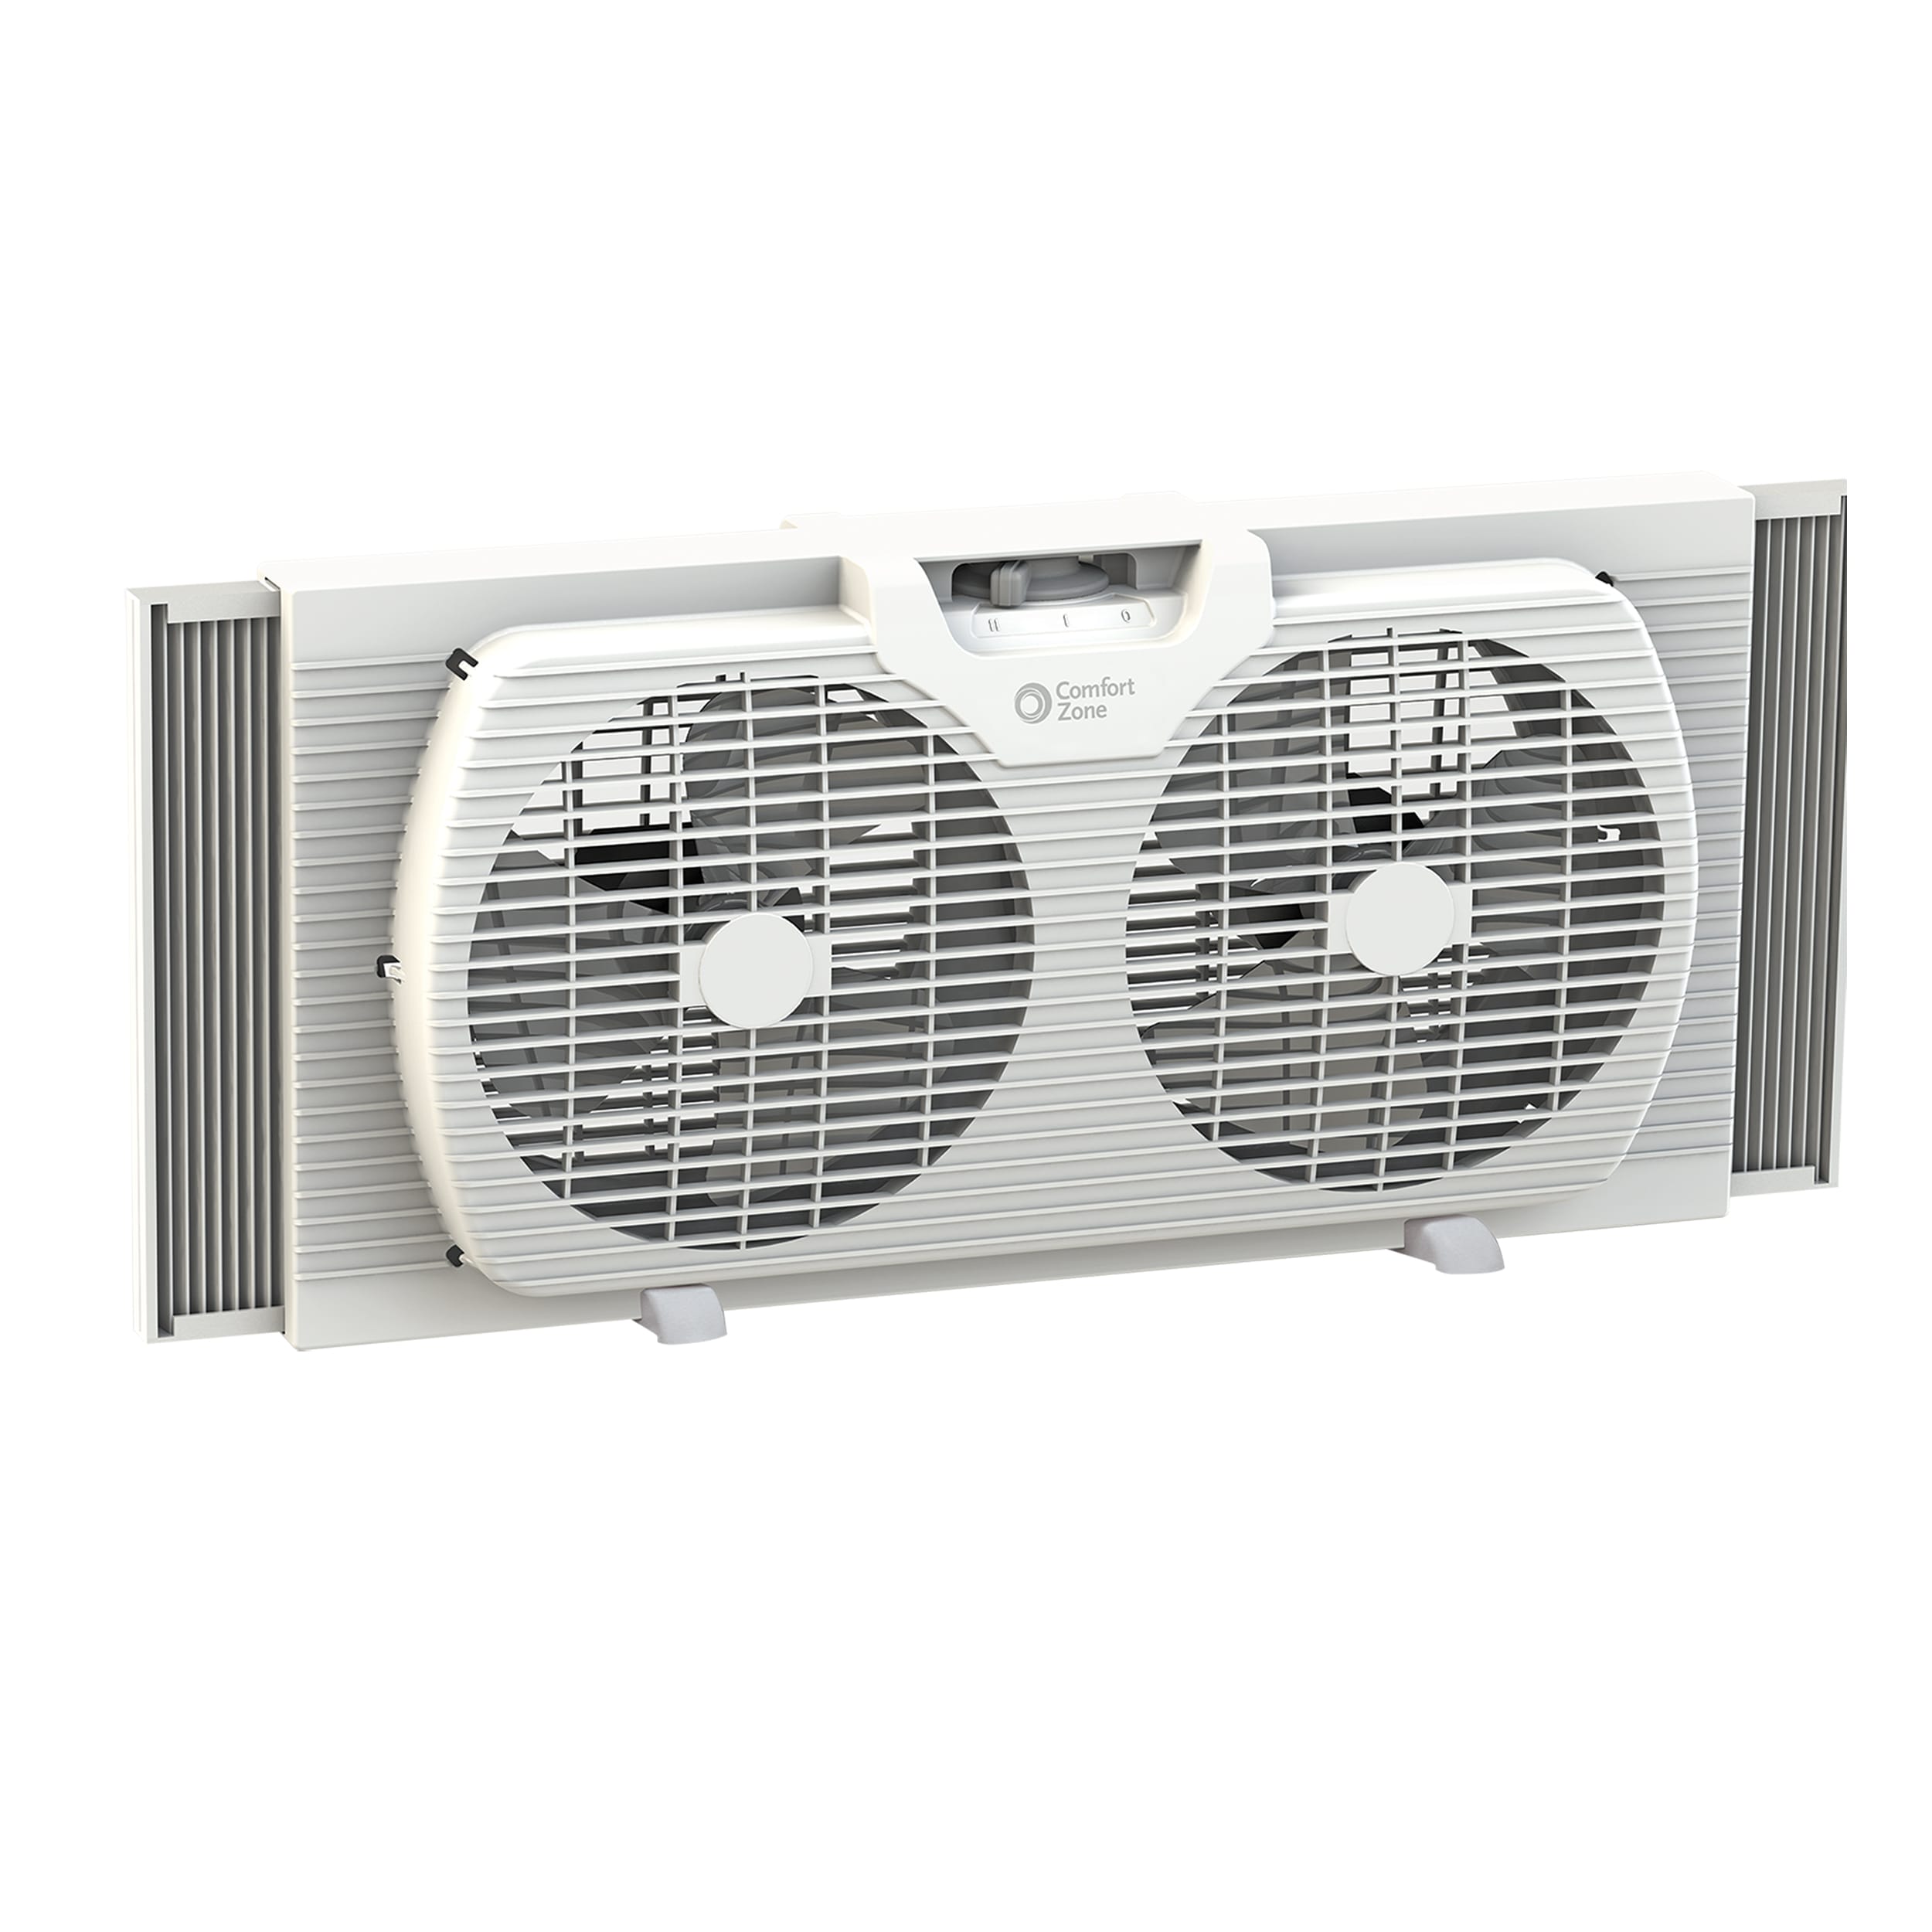 Comfort Zone 9-in 2-Speed Indoor/Outdoor White Window Fan in Portable Fans department at Lowes.com